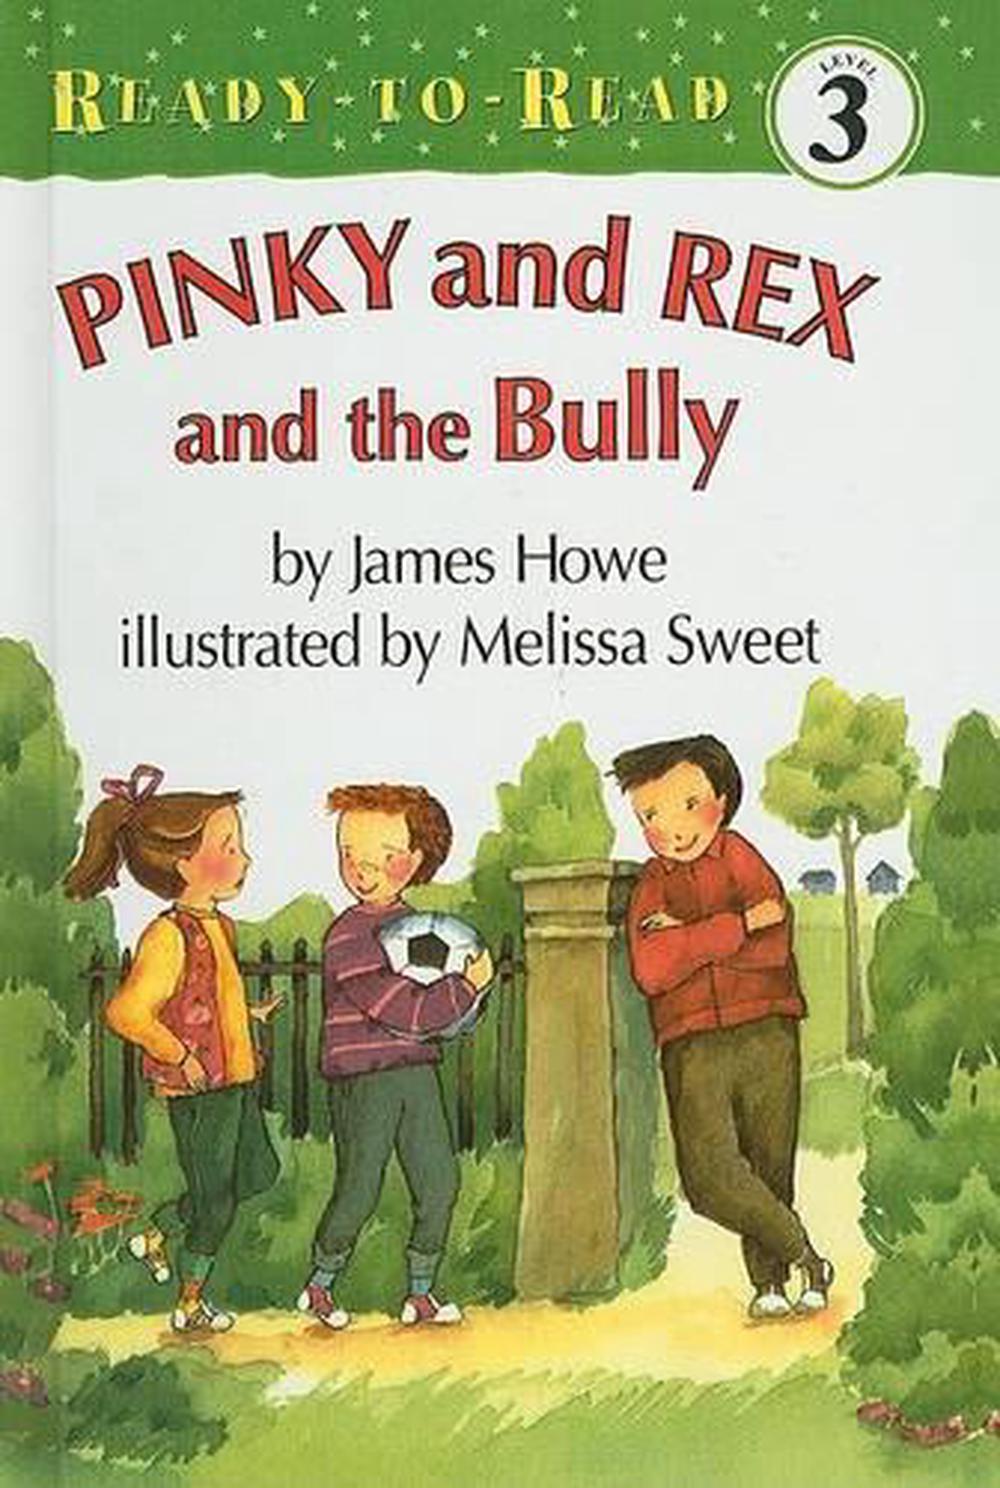 Pinky and Rex by James Howe